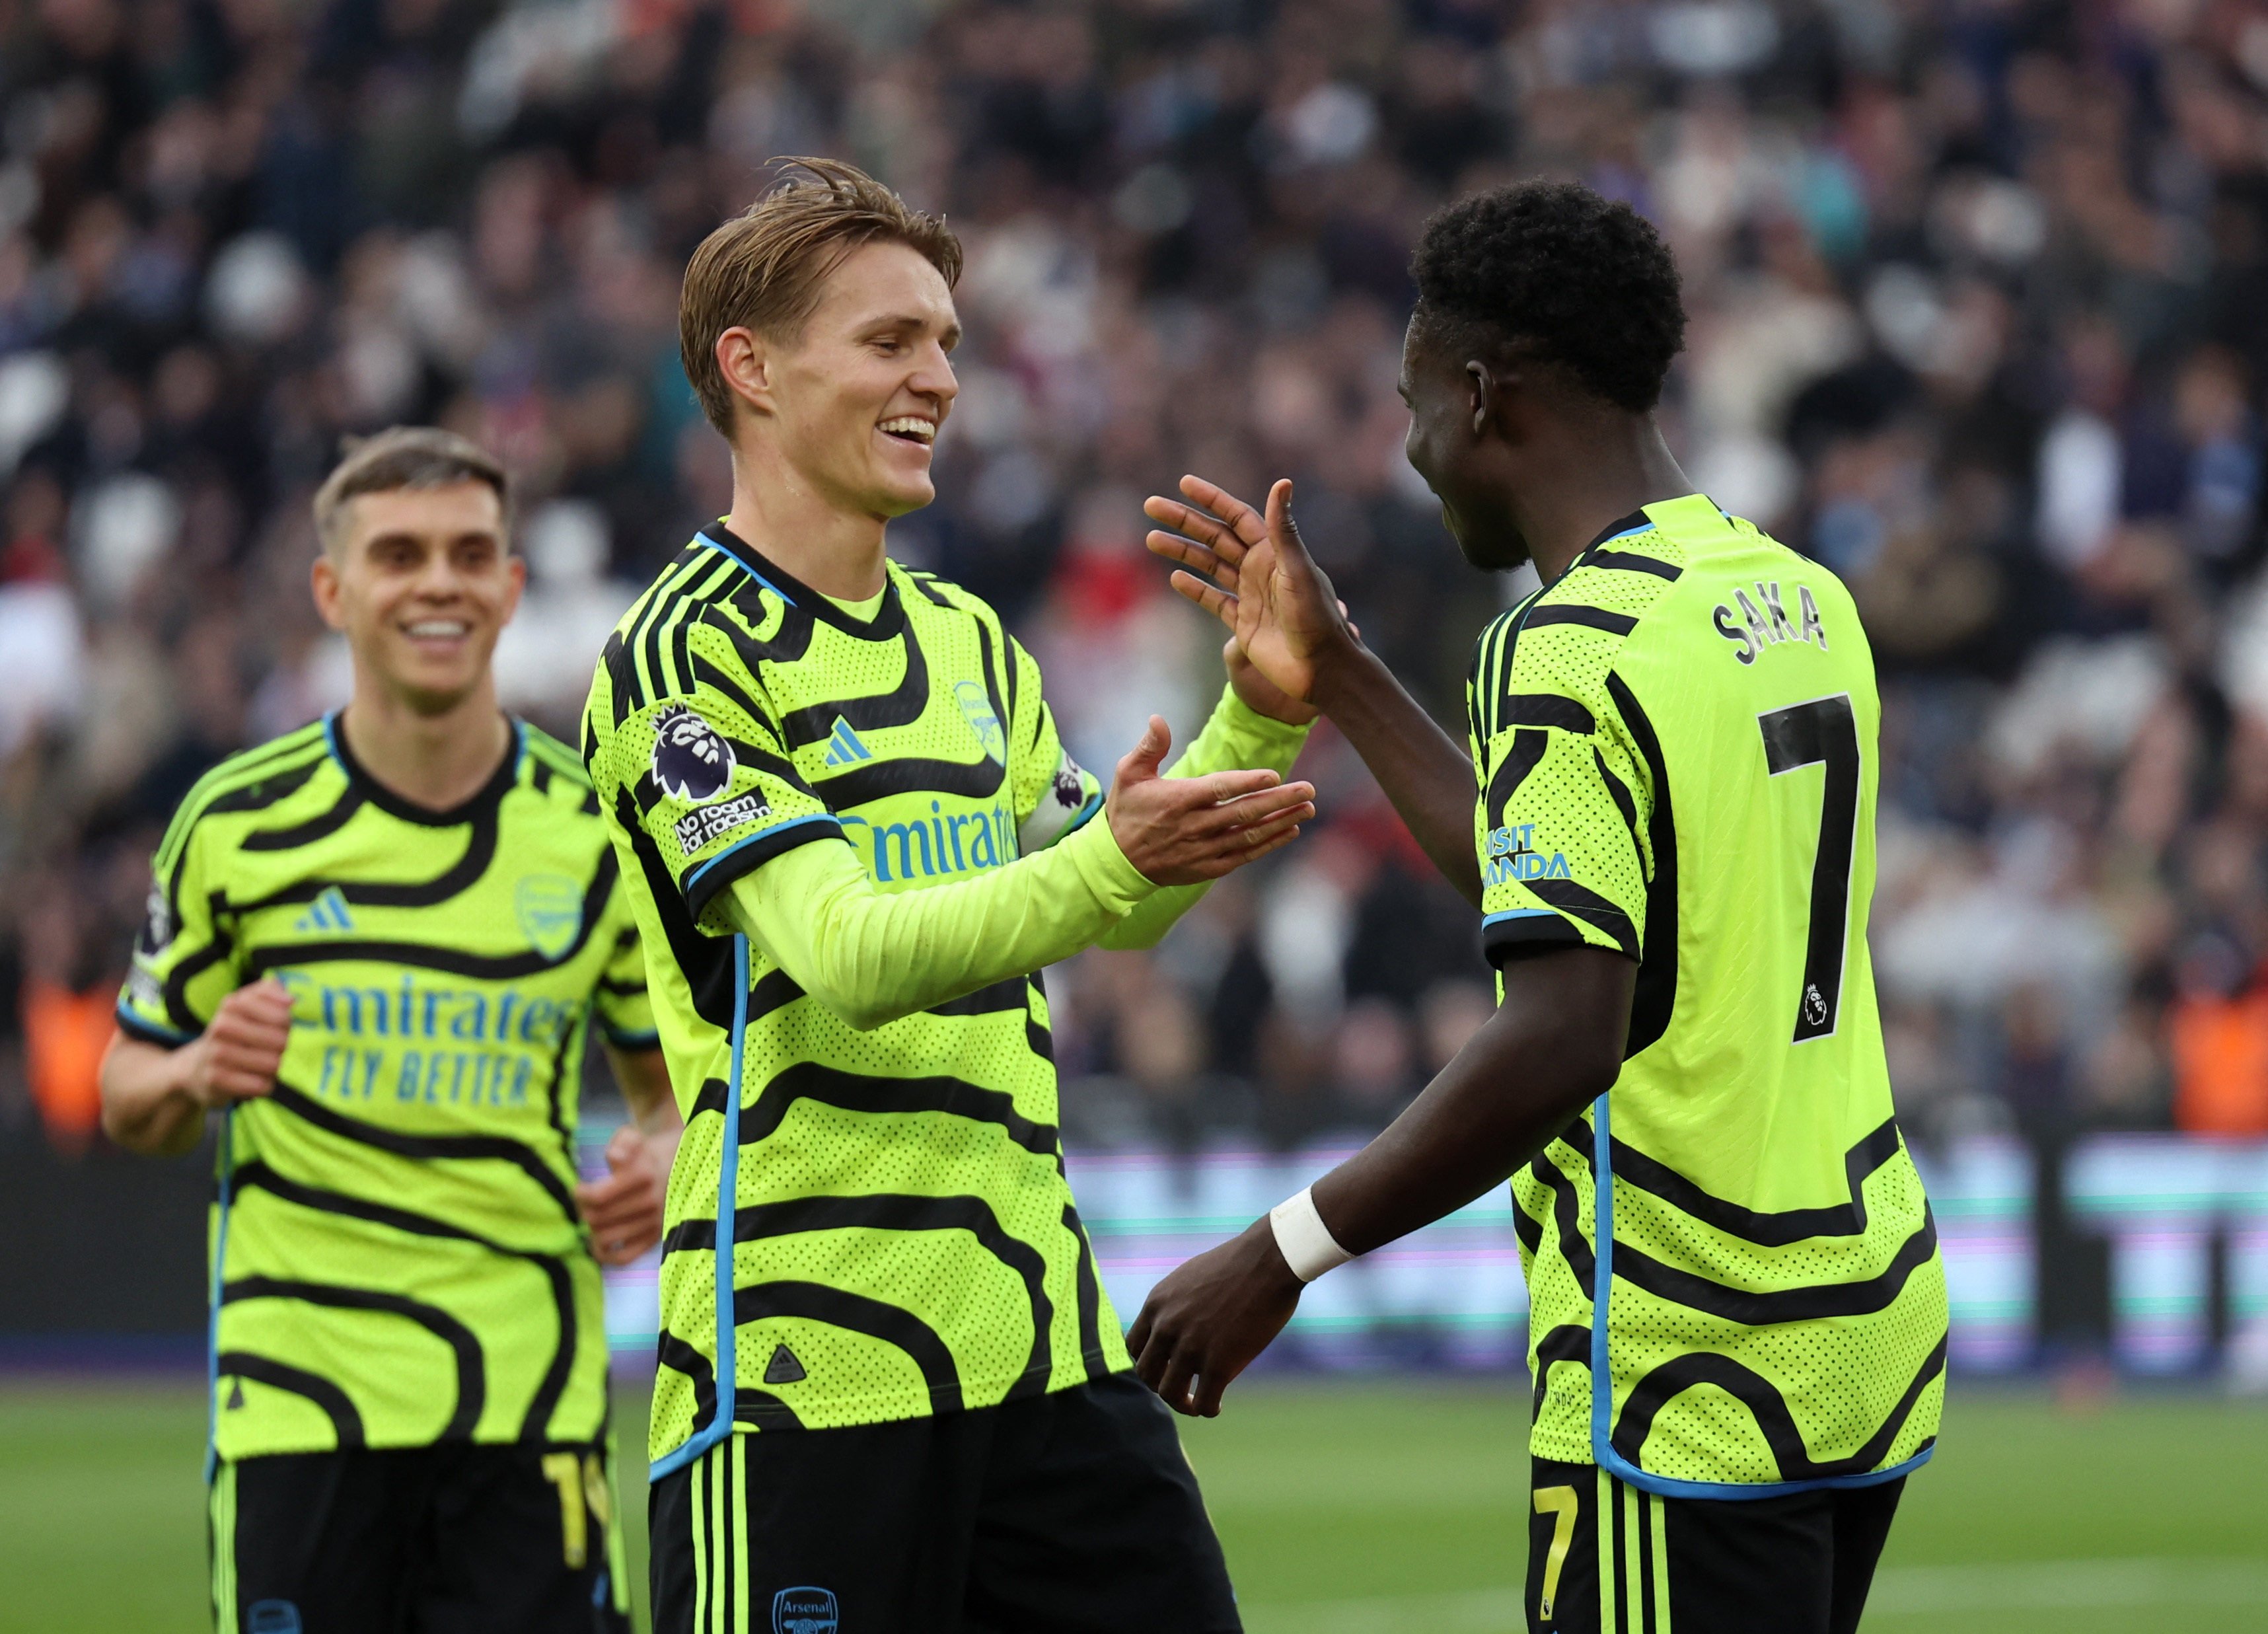 Arsenal legend Robert Pires believes Martin Odegaard (left) and Bukayo Saka can inspire Arsenal to Premier League glory. Photo: Reuters